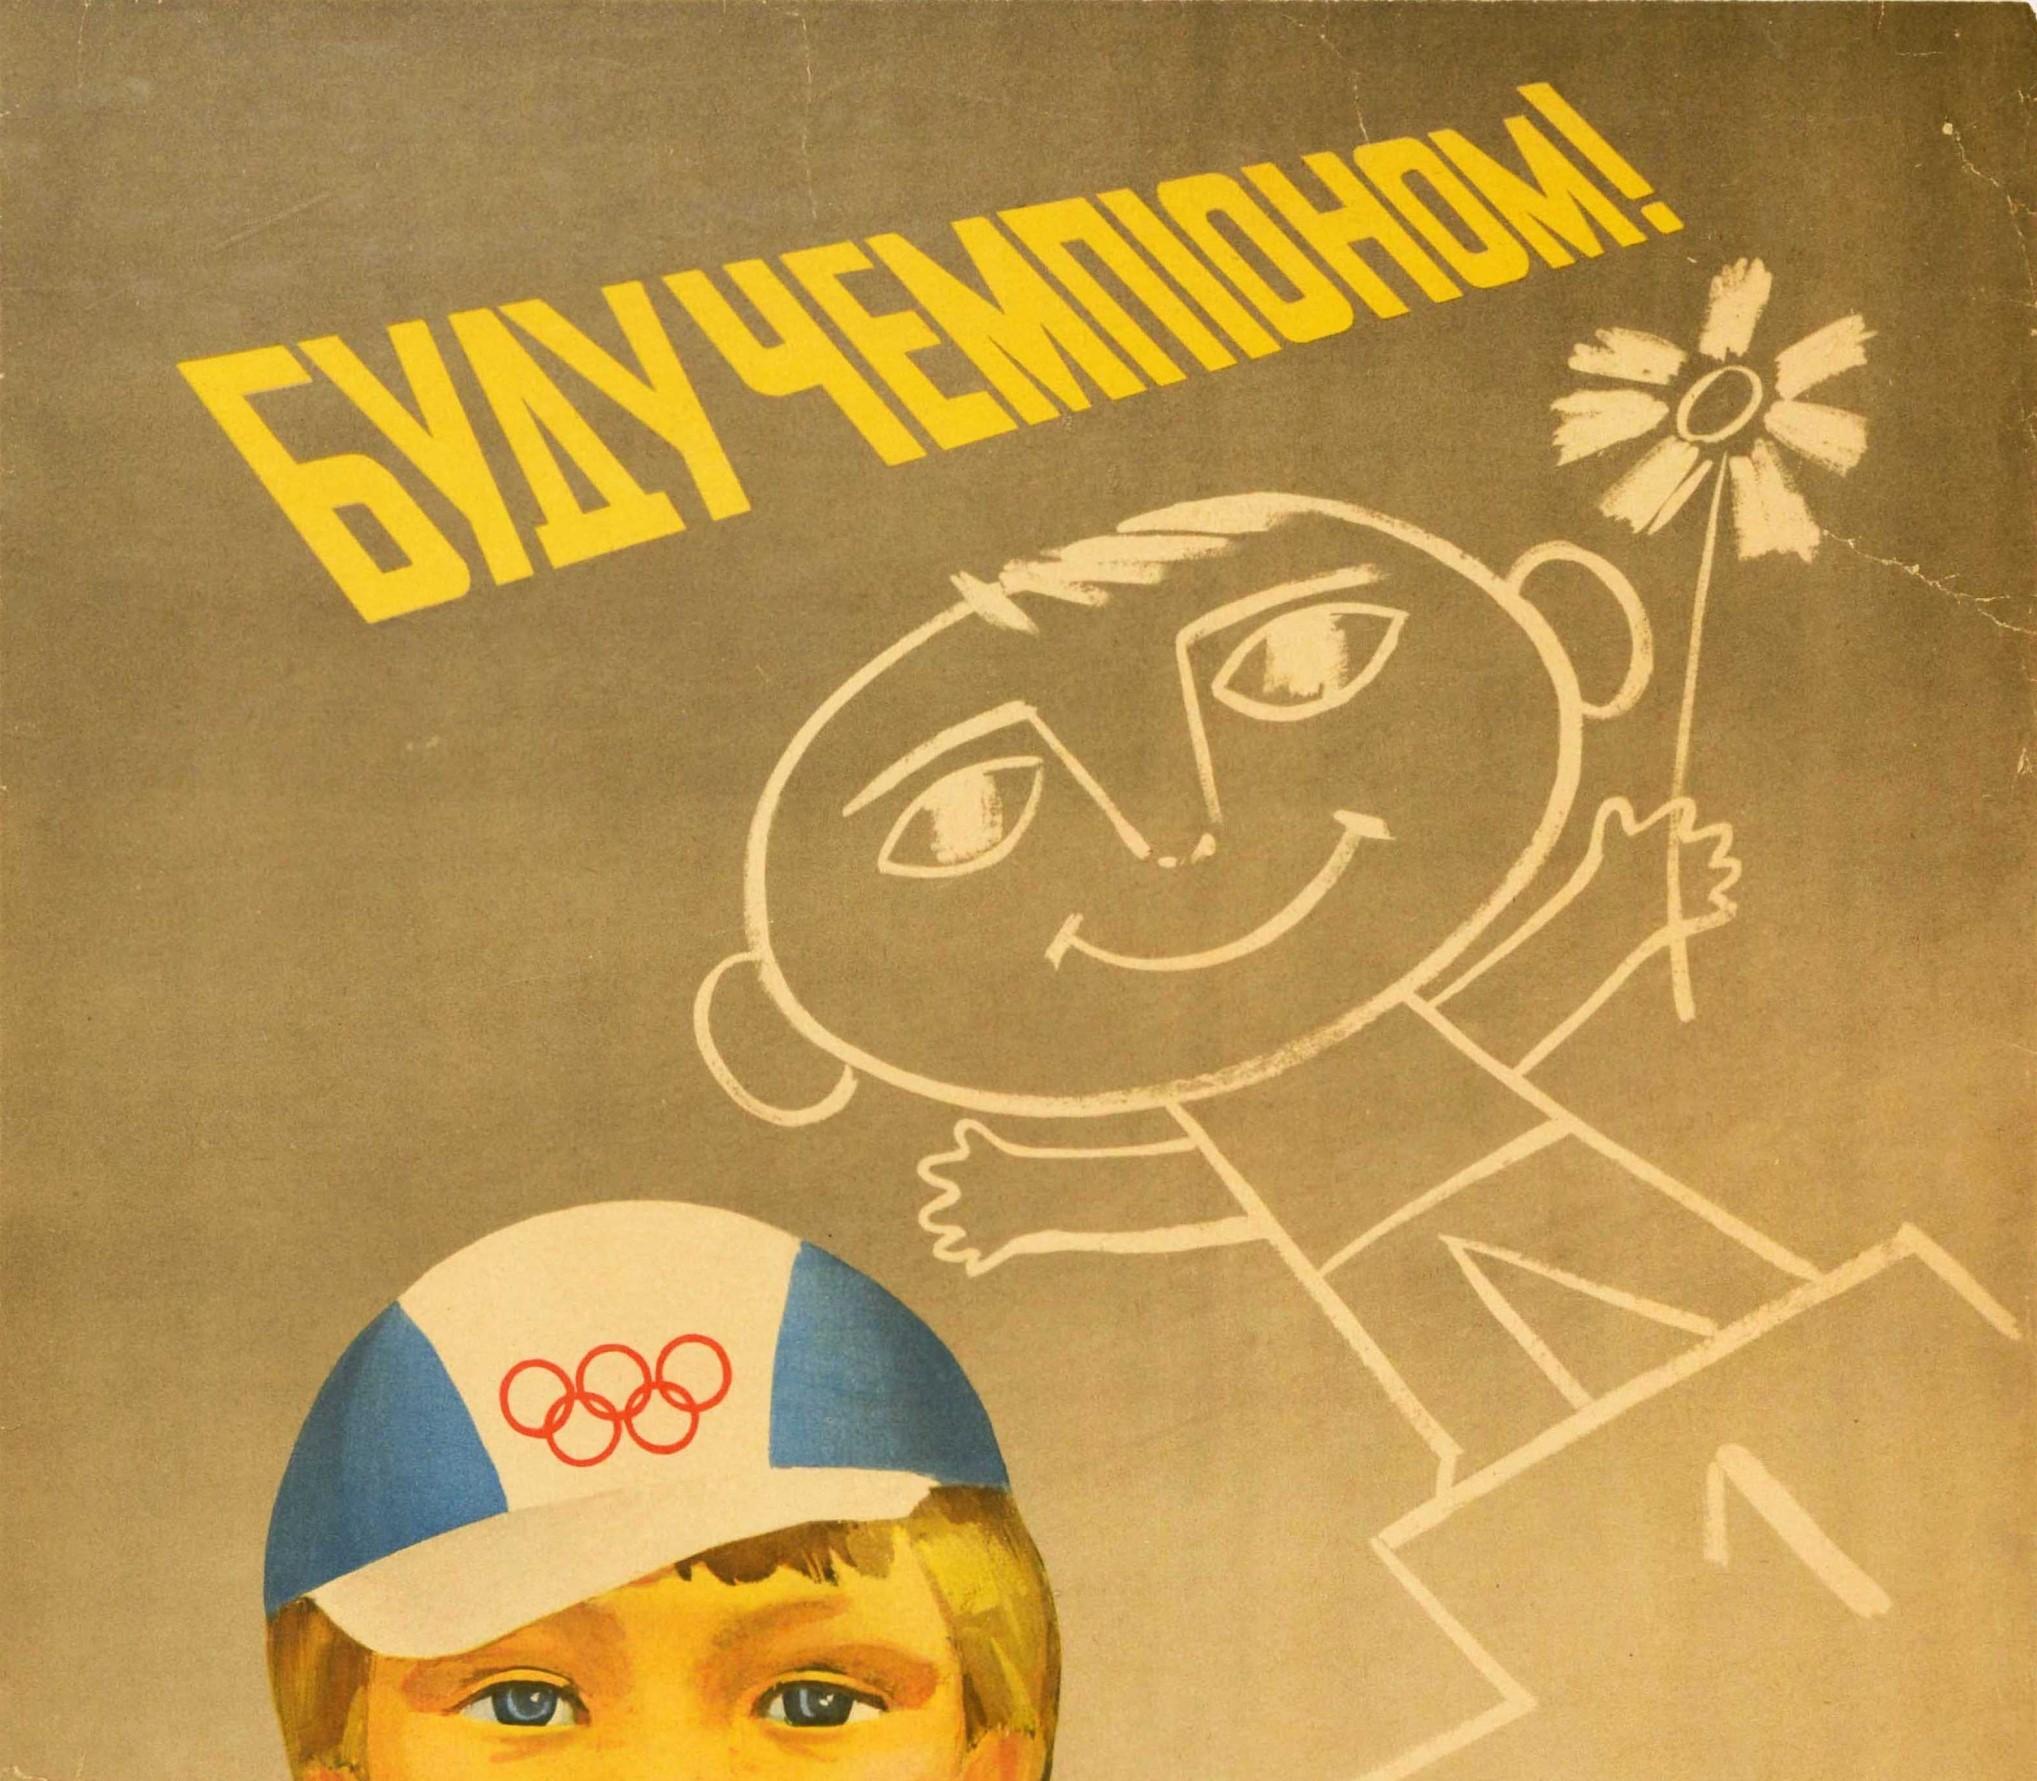 Original Vintage Poster I Will Be A Champion Children Youth Sport School Olympic - Print by Markovsky